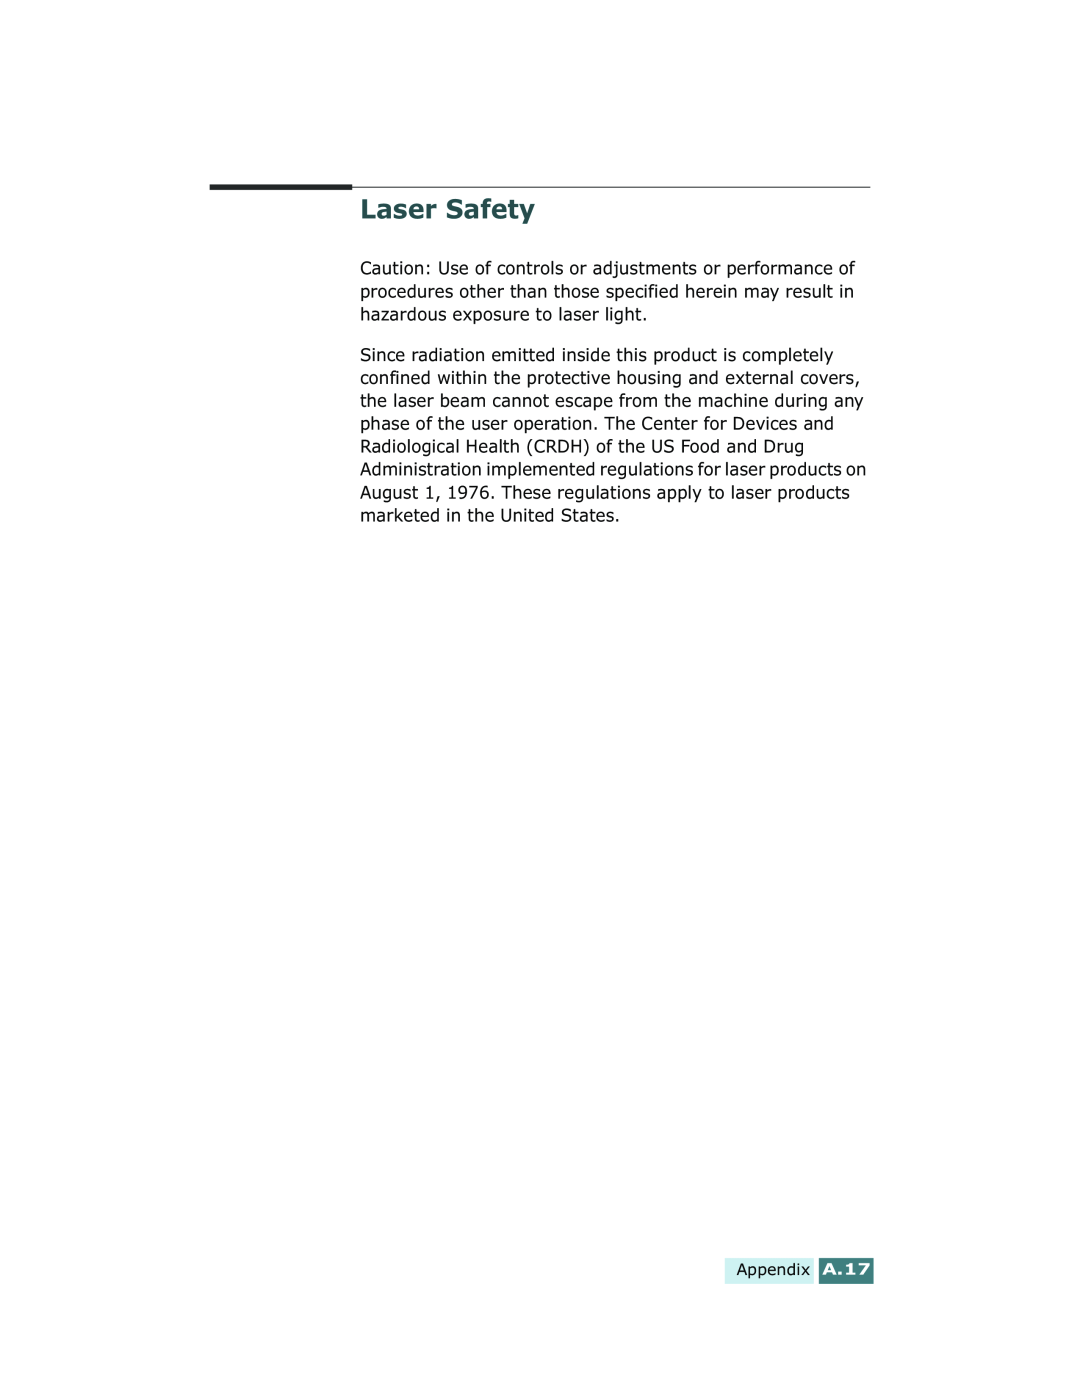 Xerox Pro 580 manual Laser Safety, Appendix A.17 